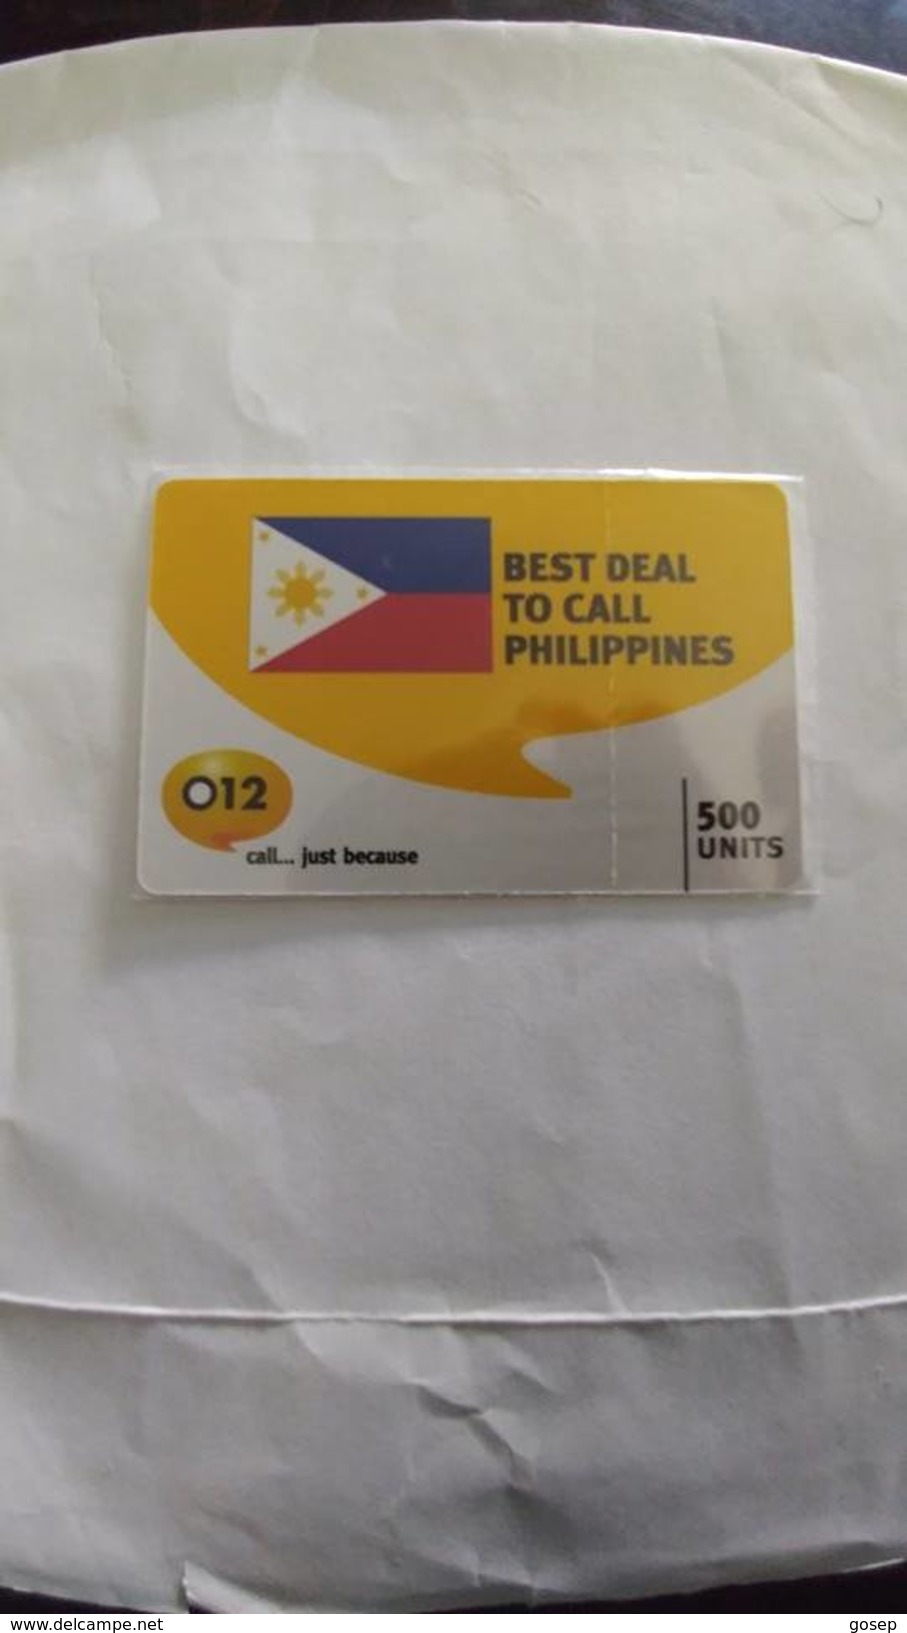 Israel-best Deal To Call Philippines-(4)-flag-(500units)-(012call Just Because)-(5.3.2008)-mint Card - Philippines